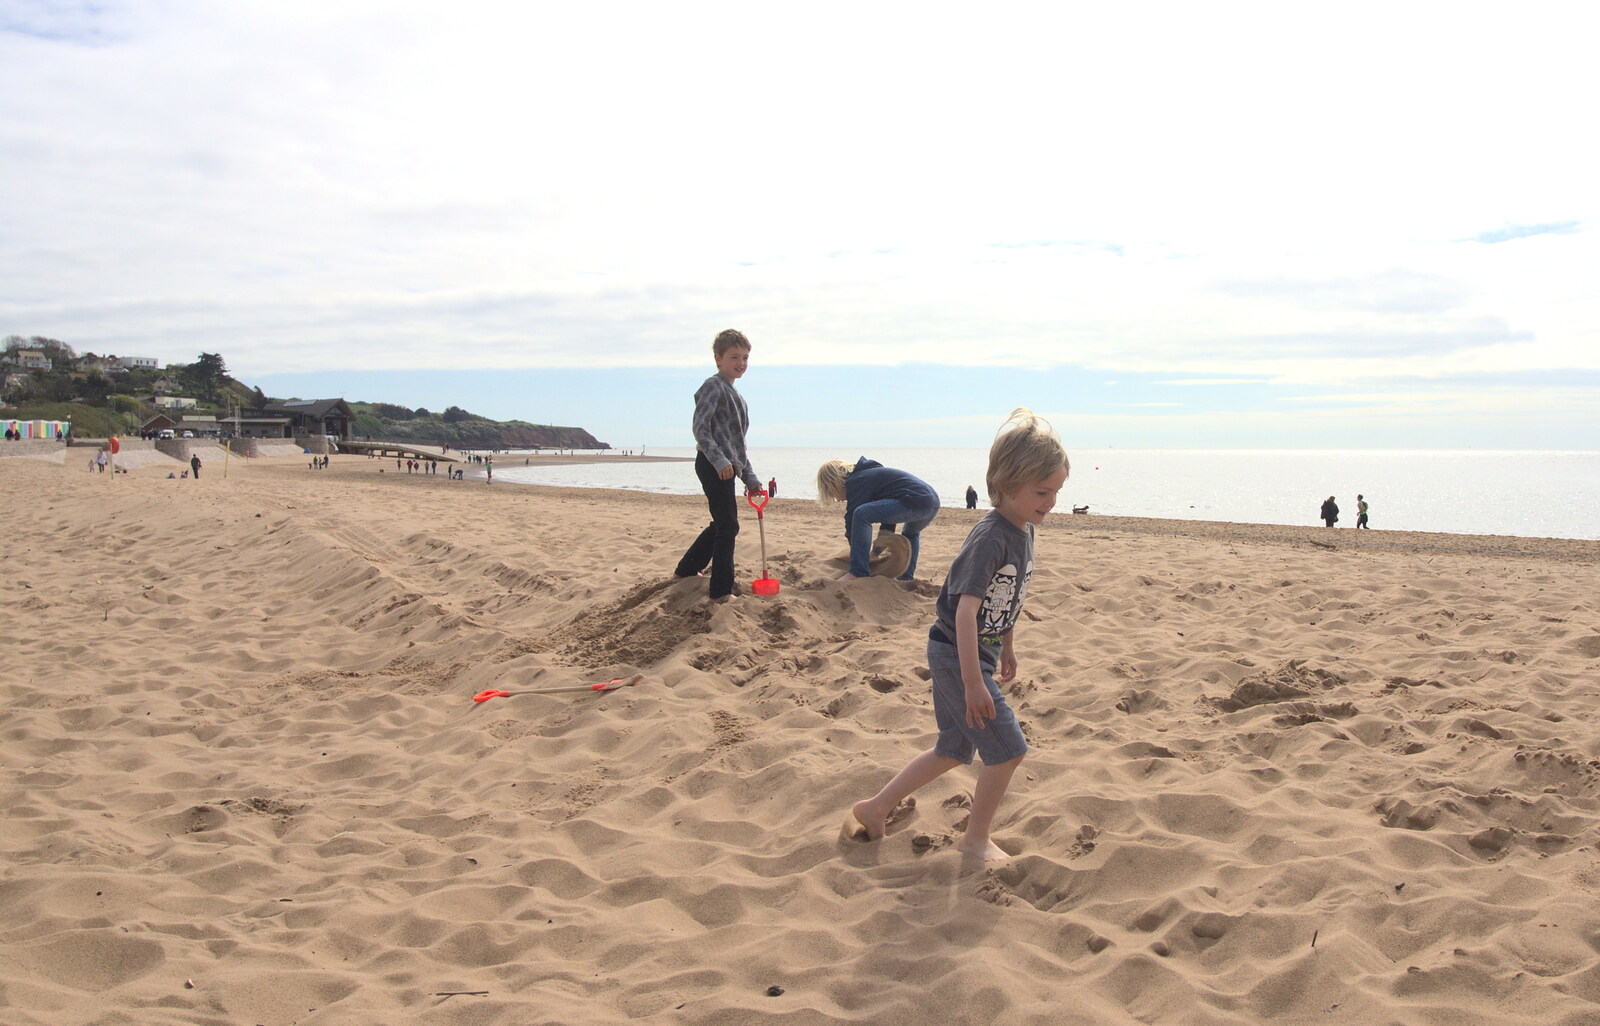 Fred and Harry on the beach at Exmouth from Grandma J's and a Day on the Beach, Spreyton and Exmouth, Devon - 13th April 2017